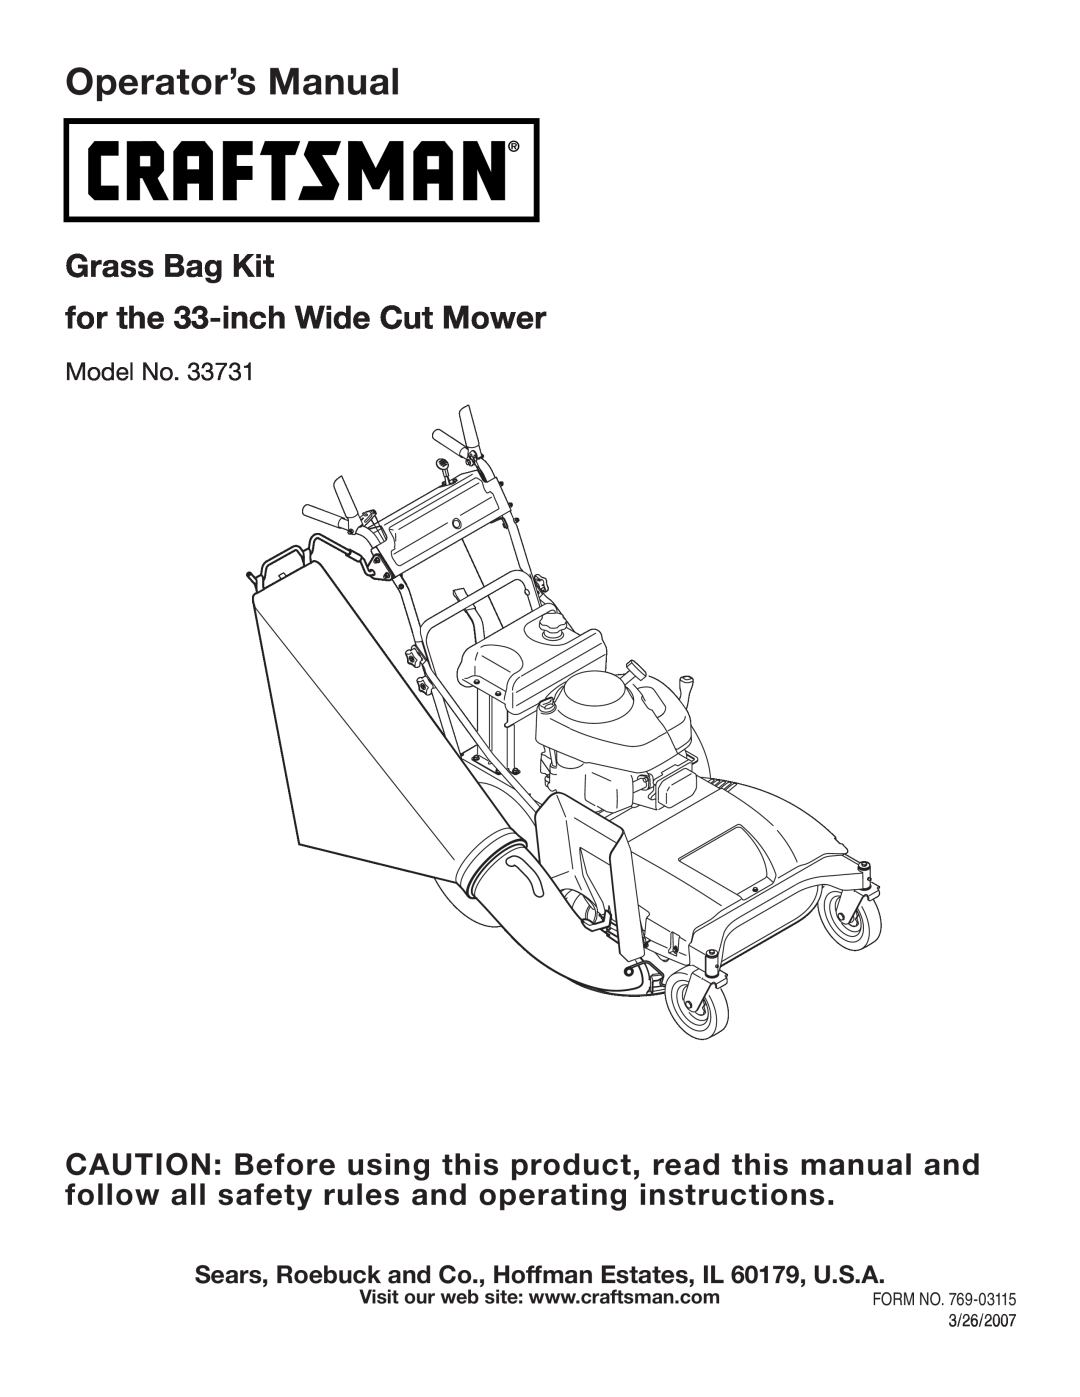 Sears 33731 manual Operator’s Manual, Grass Bag Kit for the 33-inchWide Cut Mower 